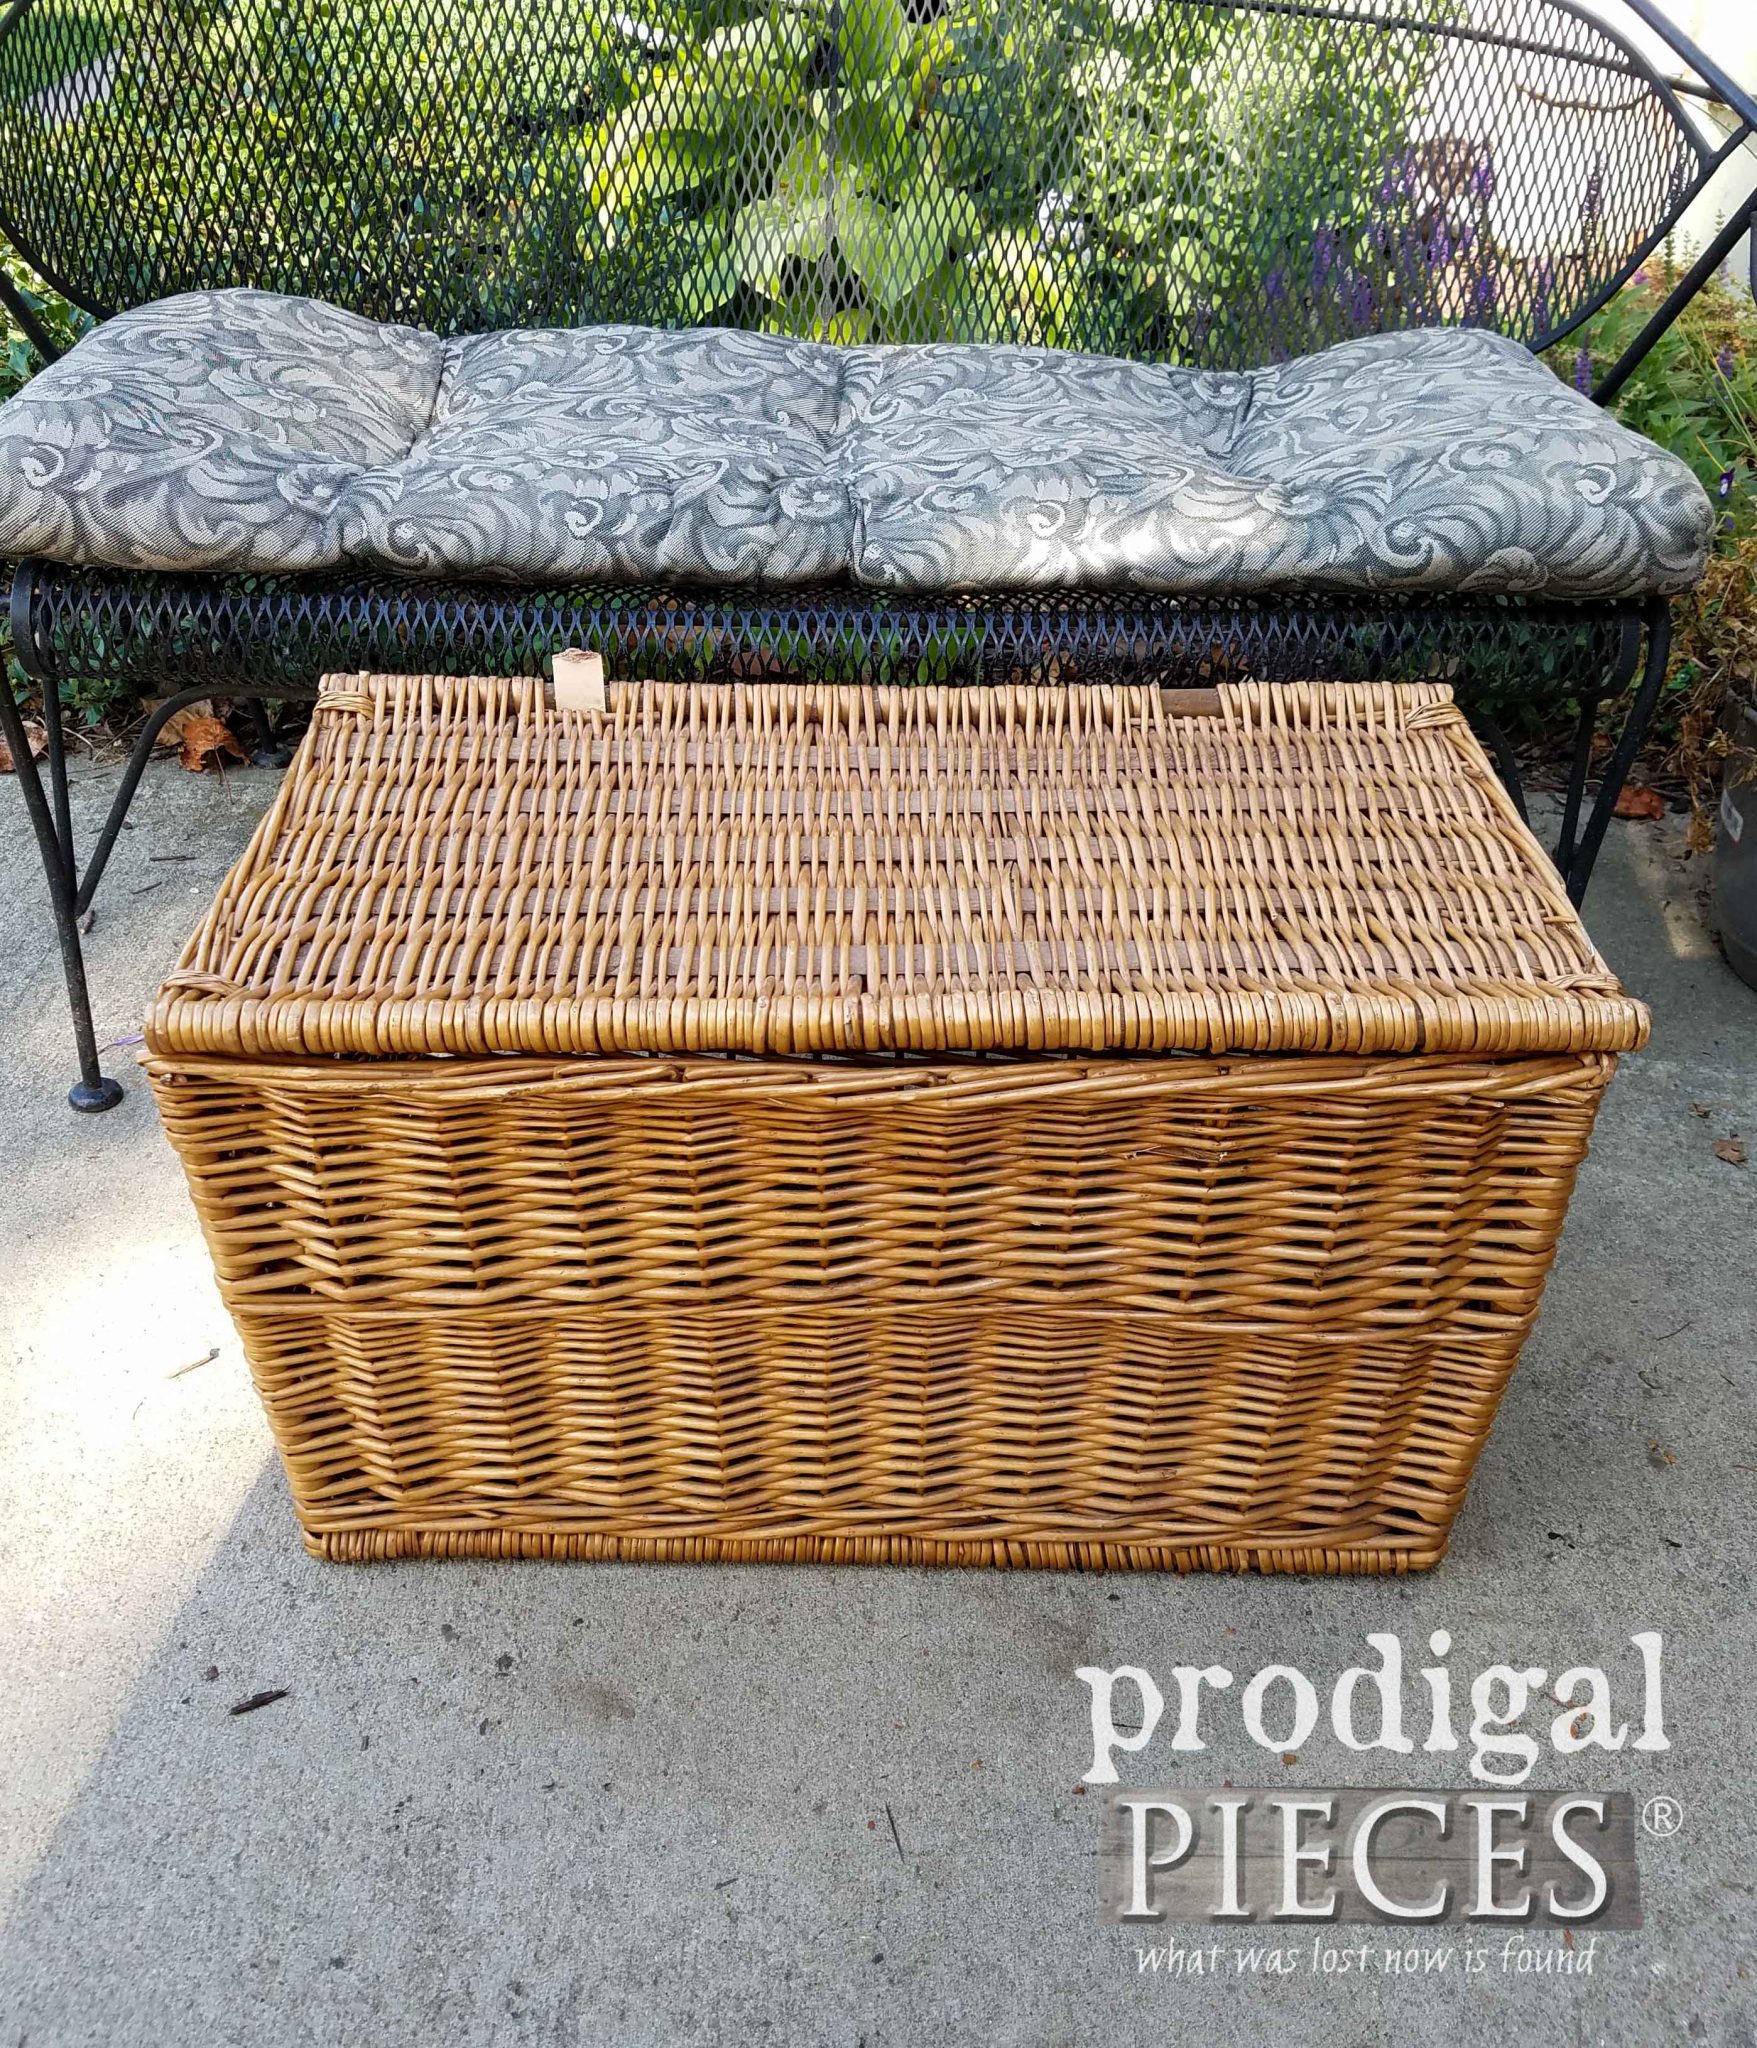 Thrifted Basket Before Makeover by Prodigal Pieces | prodigalpieces.com